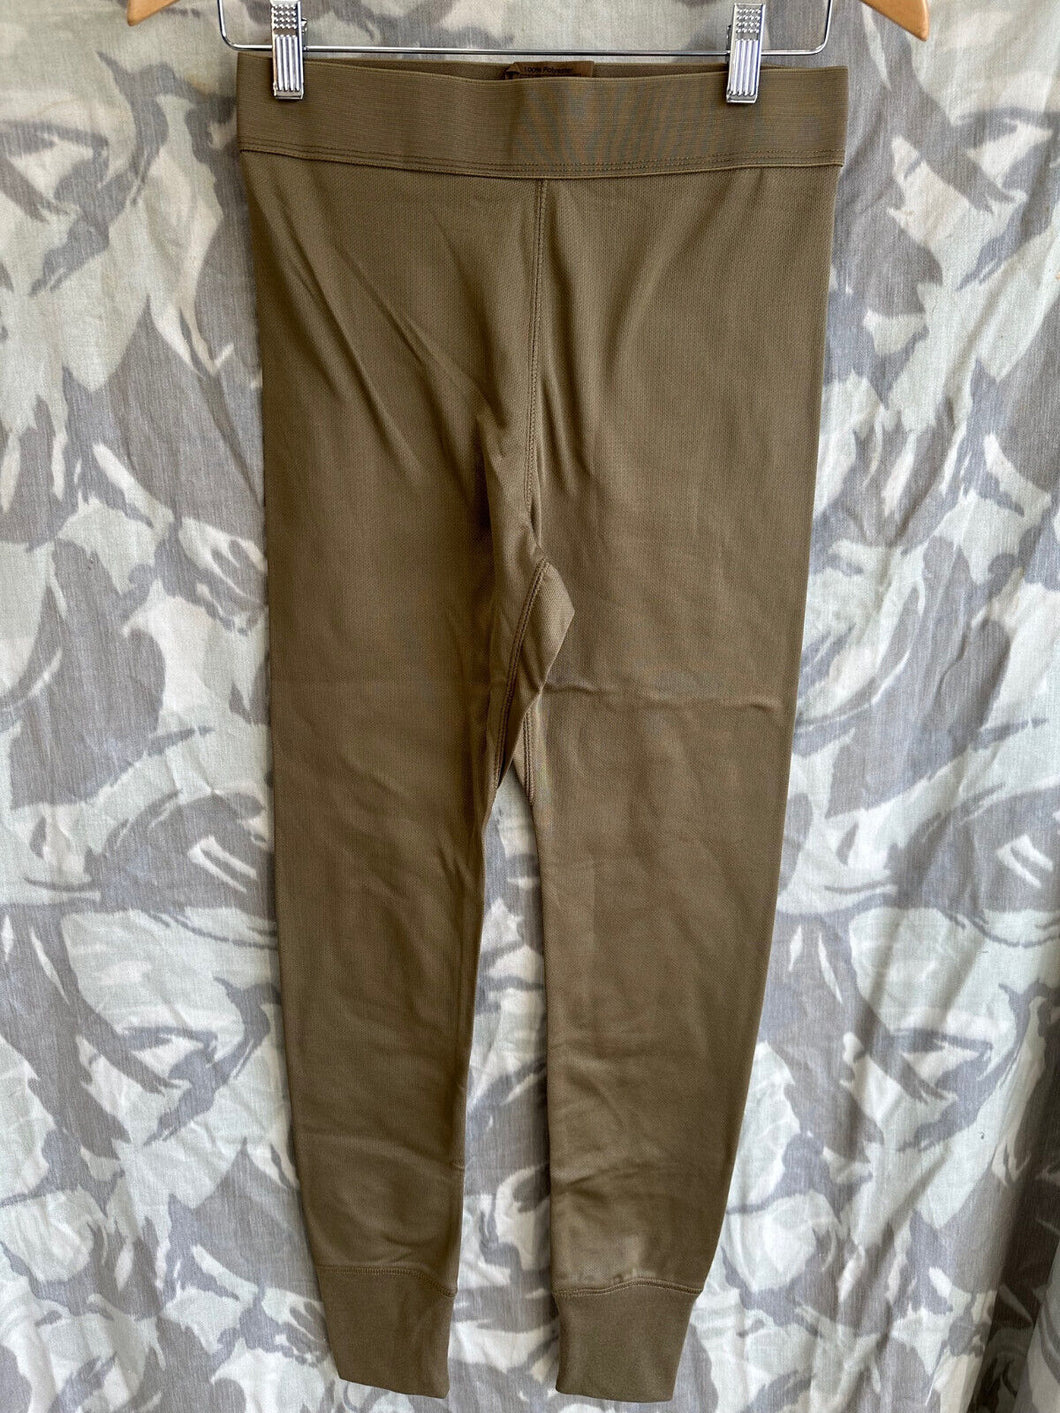 British Army Thermal Underwear Long Breeches - New Old Stock - 160/70